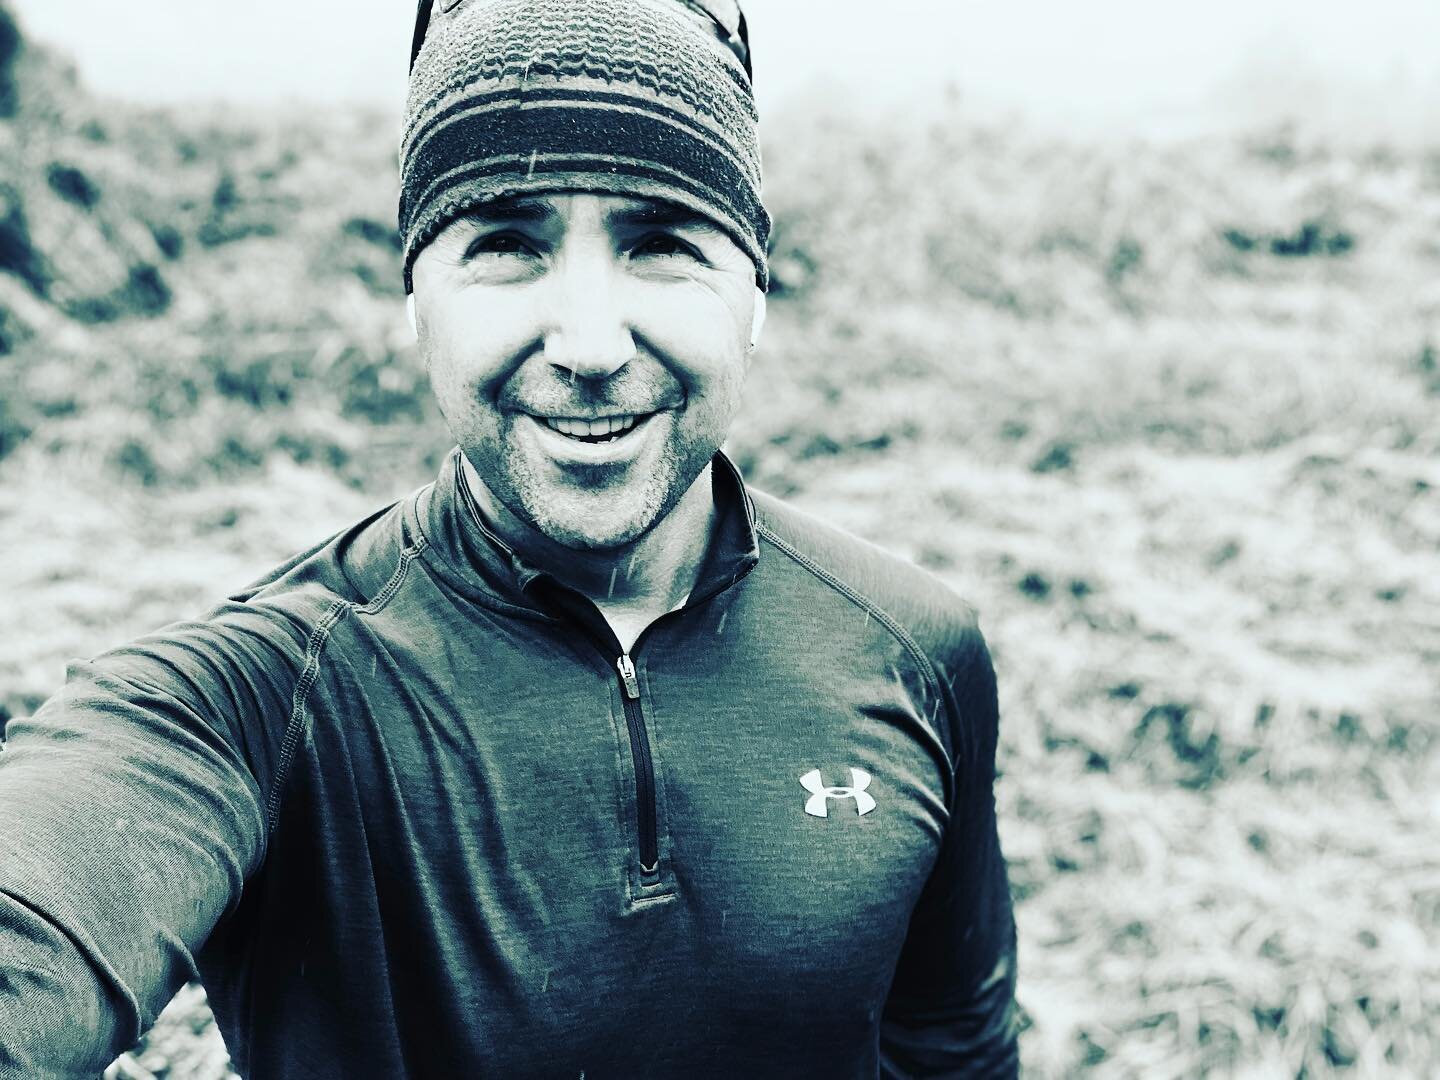 Eeeasy run.  Six miles of hills in the rain.  Love this autumn weather. 

For me, resilience starts on an individual level.  I can't show up for my boss, clients, or family if I haven't attended to myself too.  In my case I have to spend energy to ge